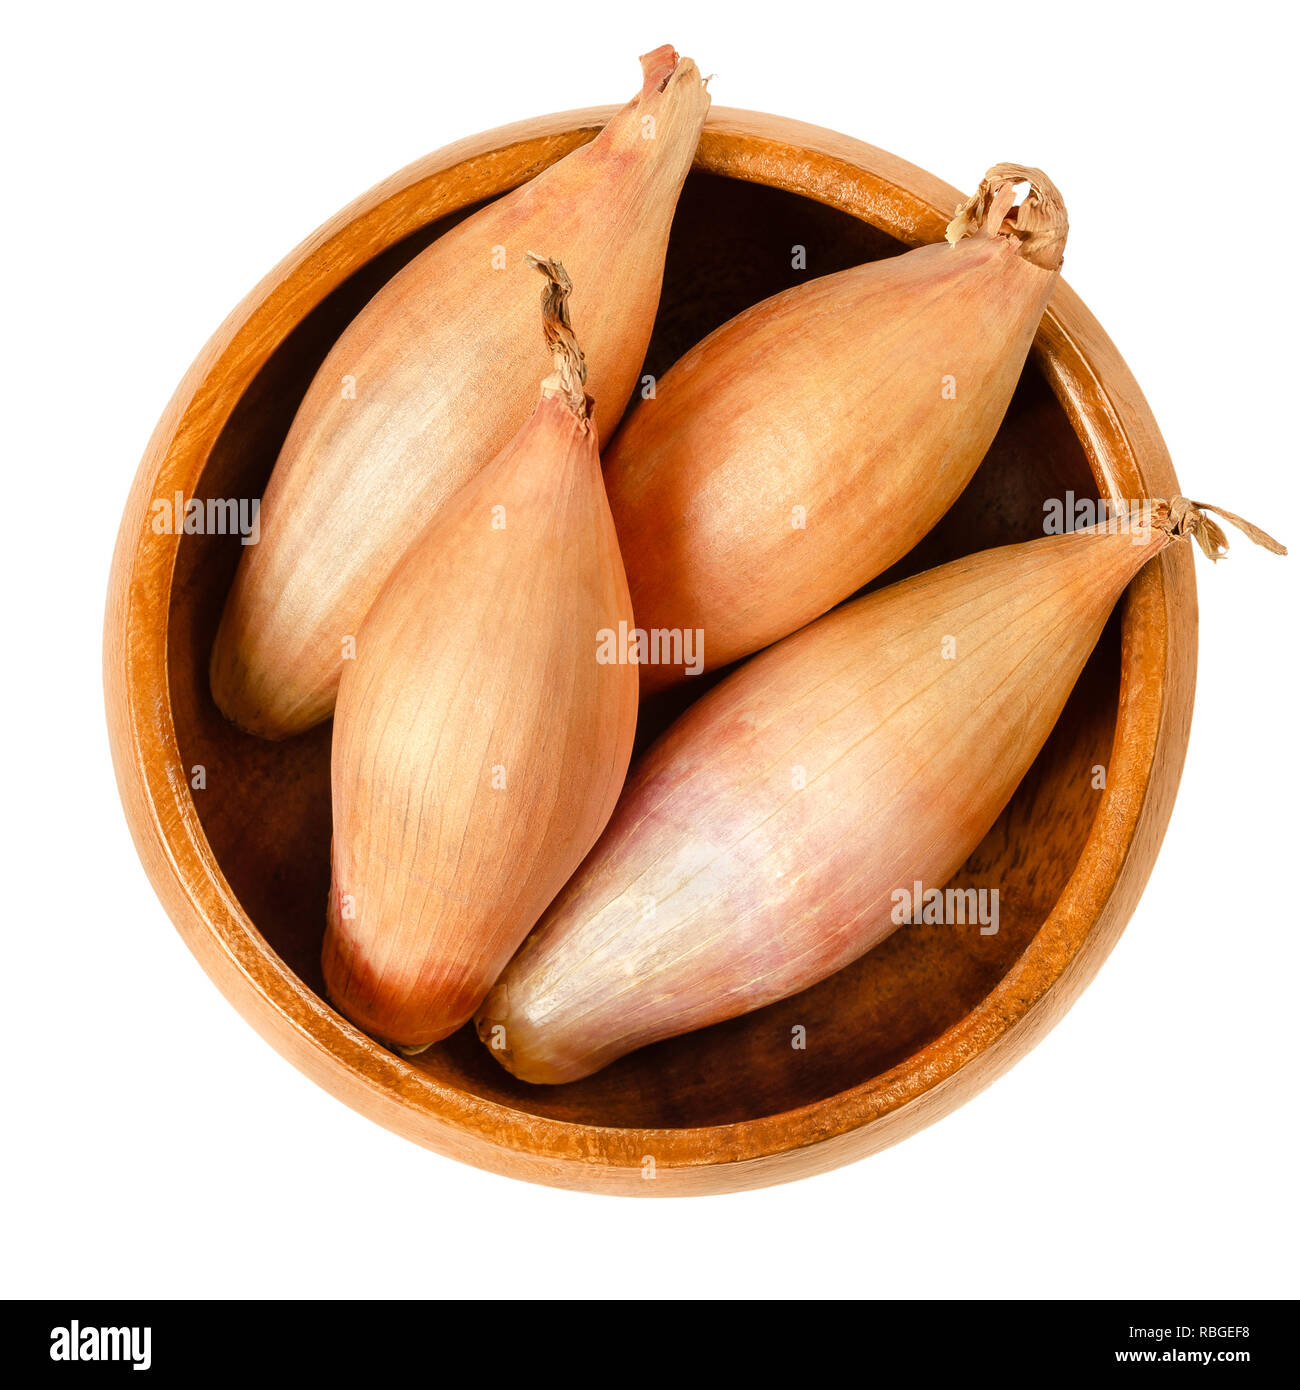 Whole long shallots in wooden bowl. Type of onion, Longor, French variety of Allium cepa with mild flavor. Brown, edible, raw, organic and vegan plant Stock Photo